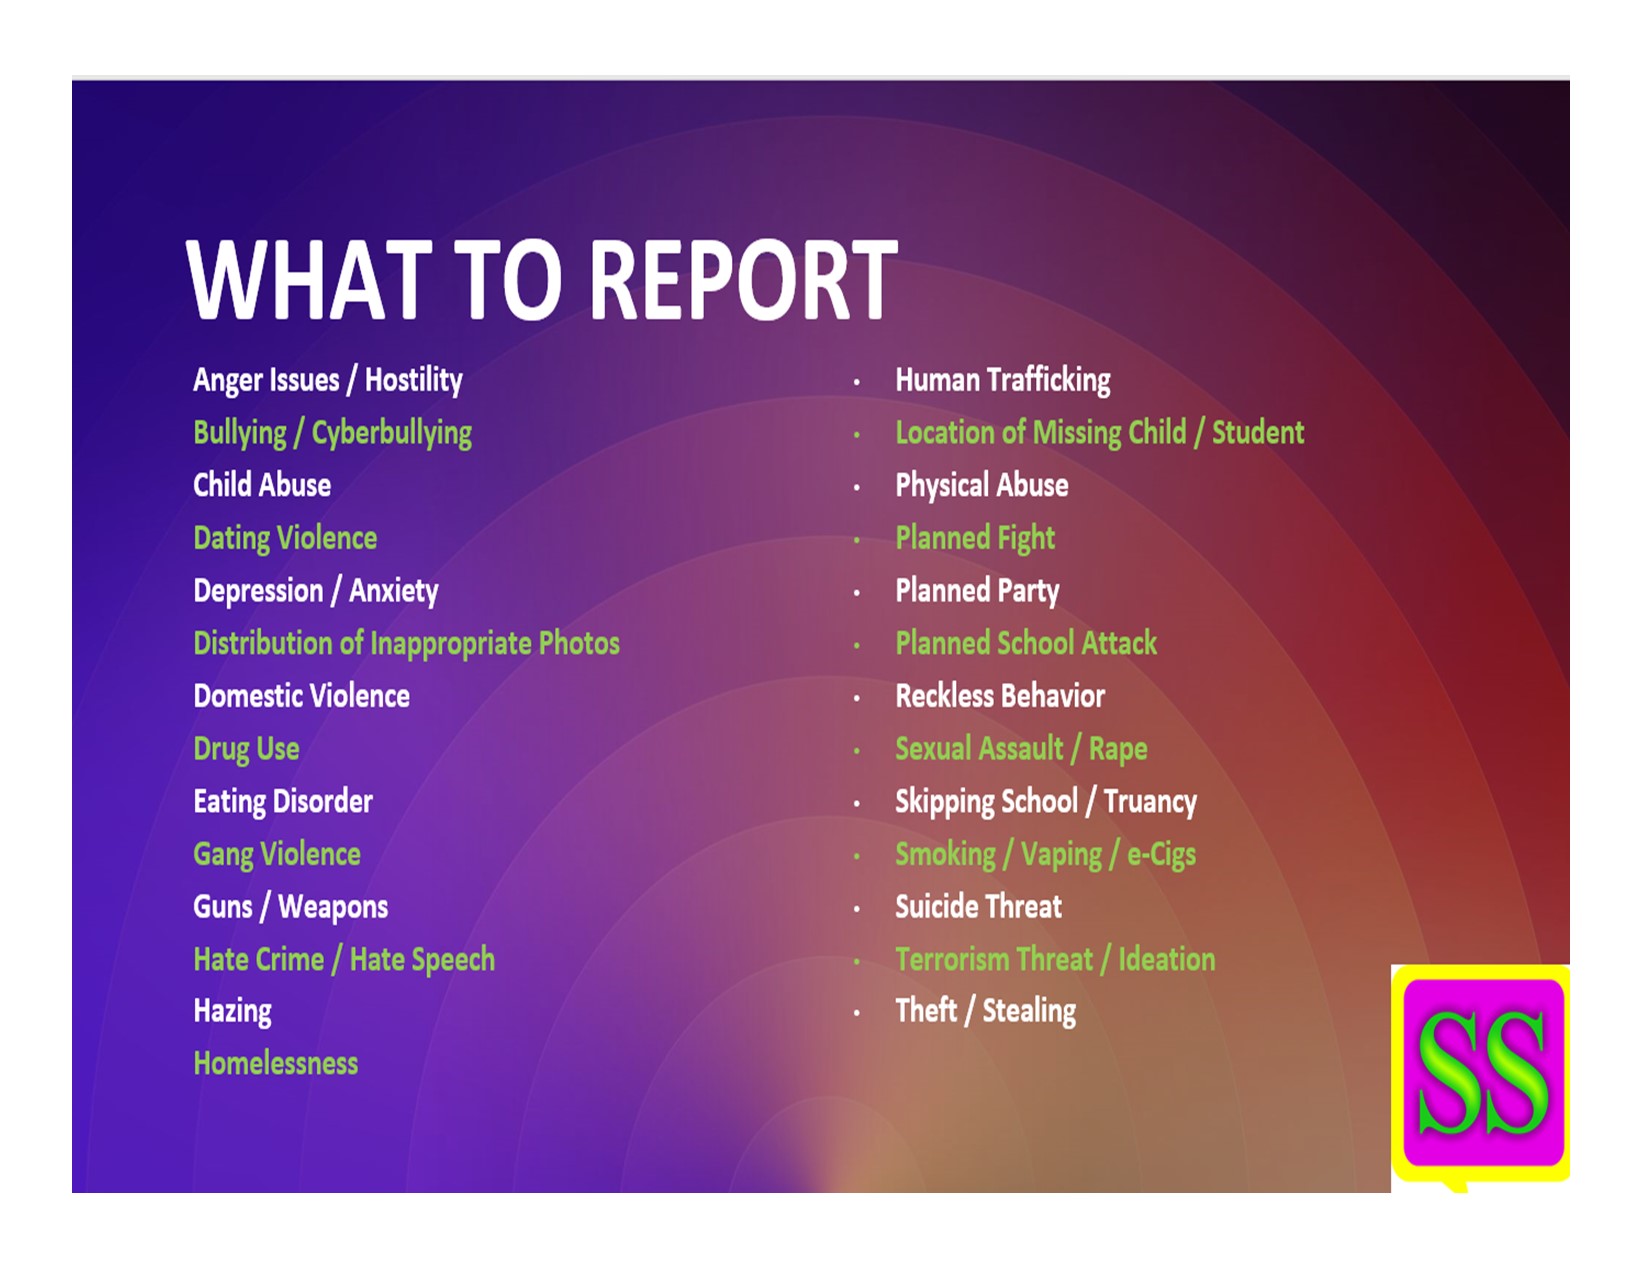 This app lets students anonymously report bullying and crime